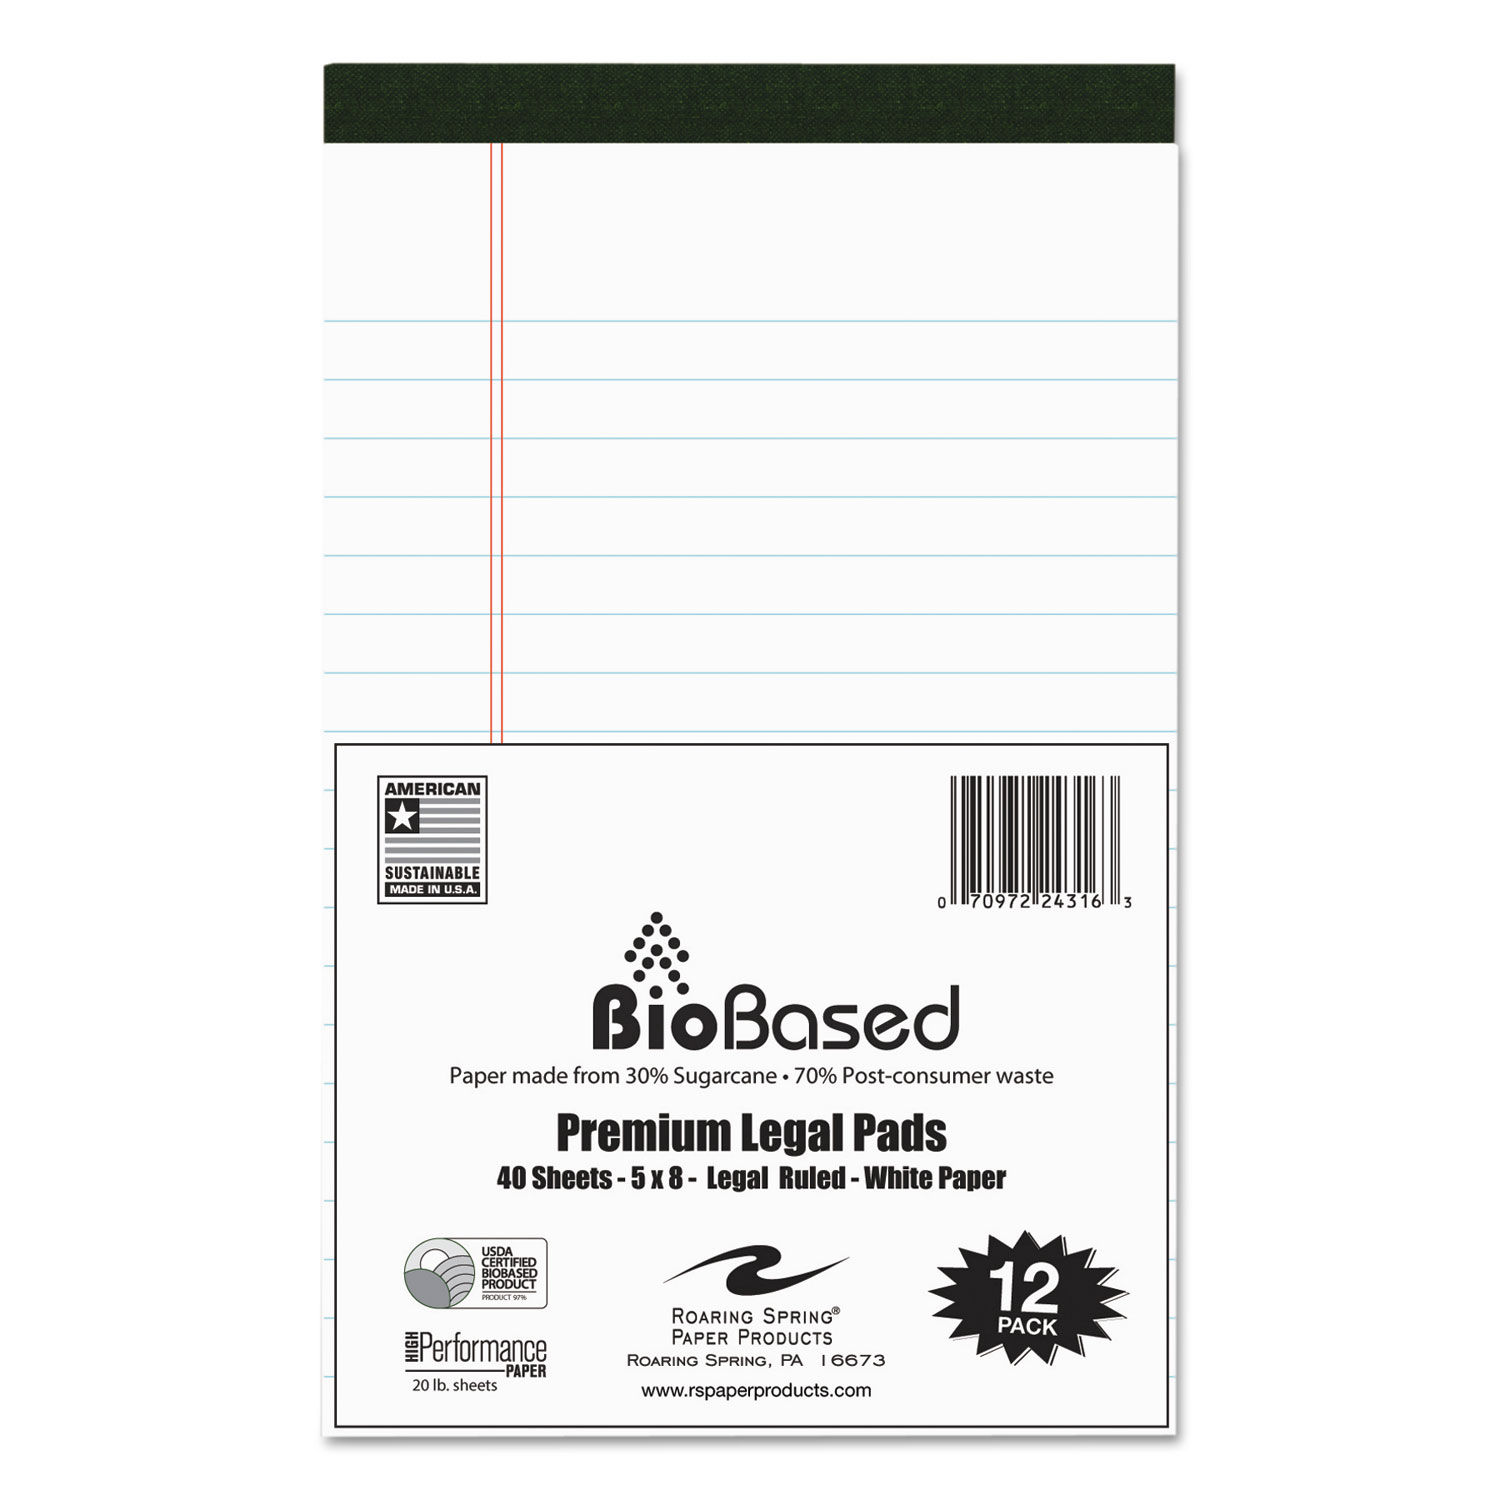 USDA Certified Bio-Preferred Legal Pad Wide/Legal Rule, 40 White 5 x 8 Sheets, 12/Pack